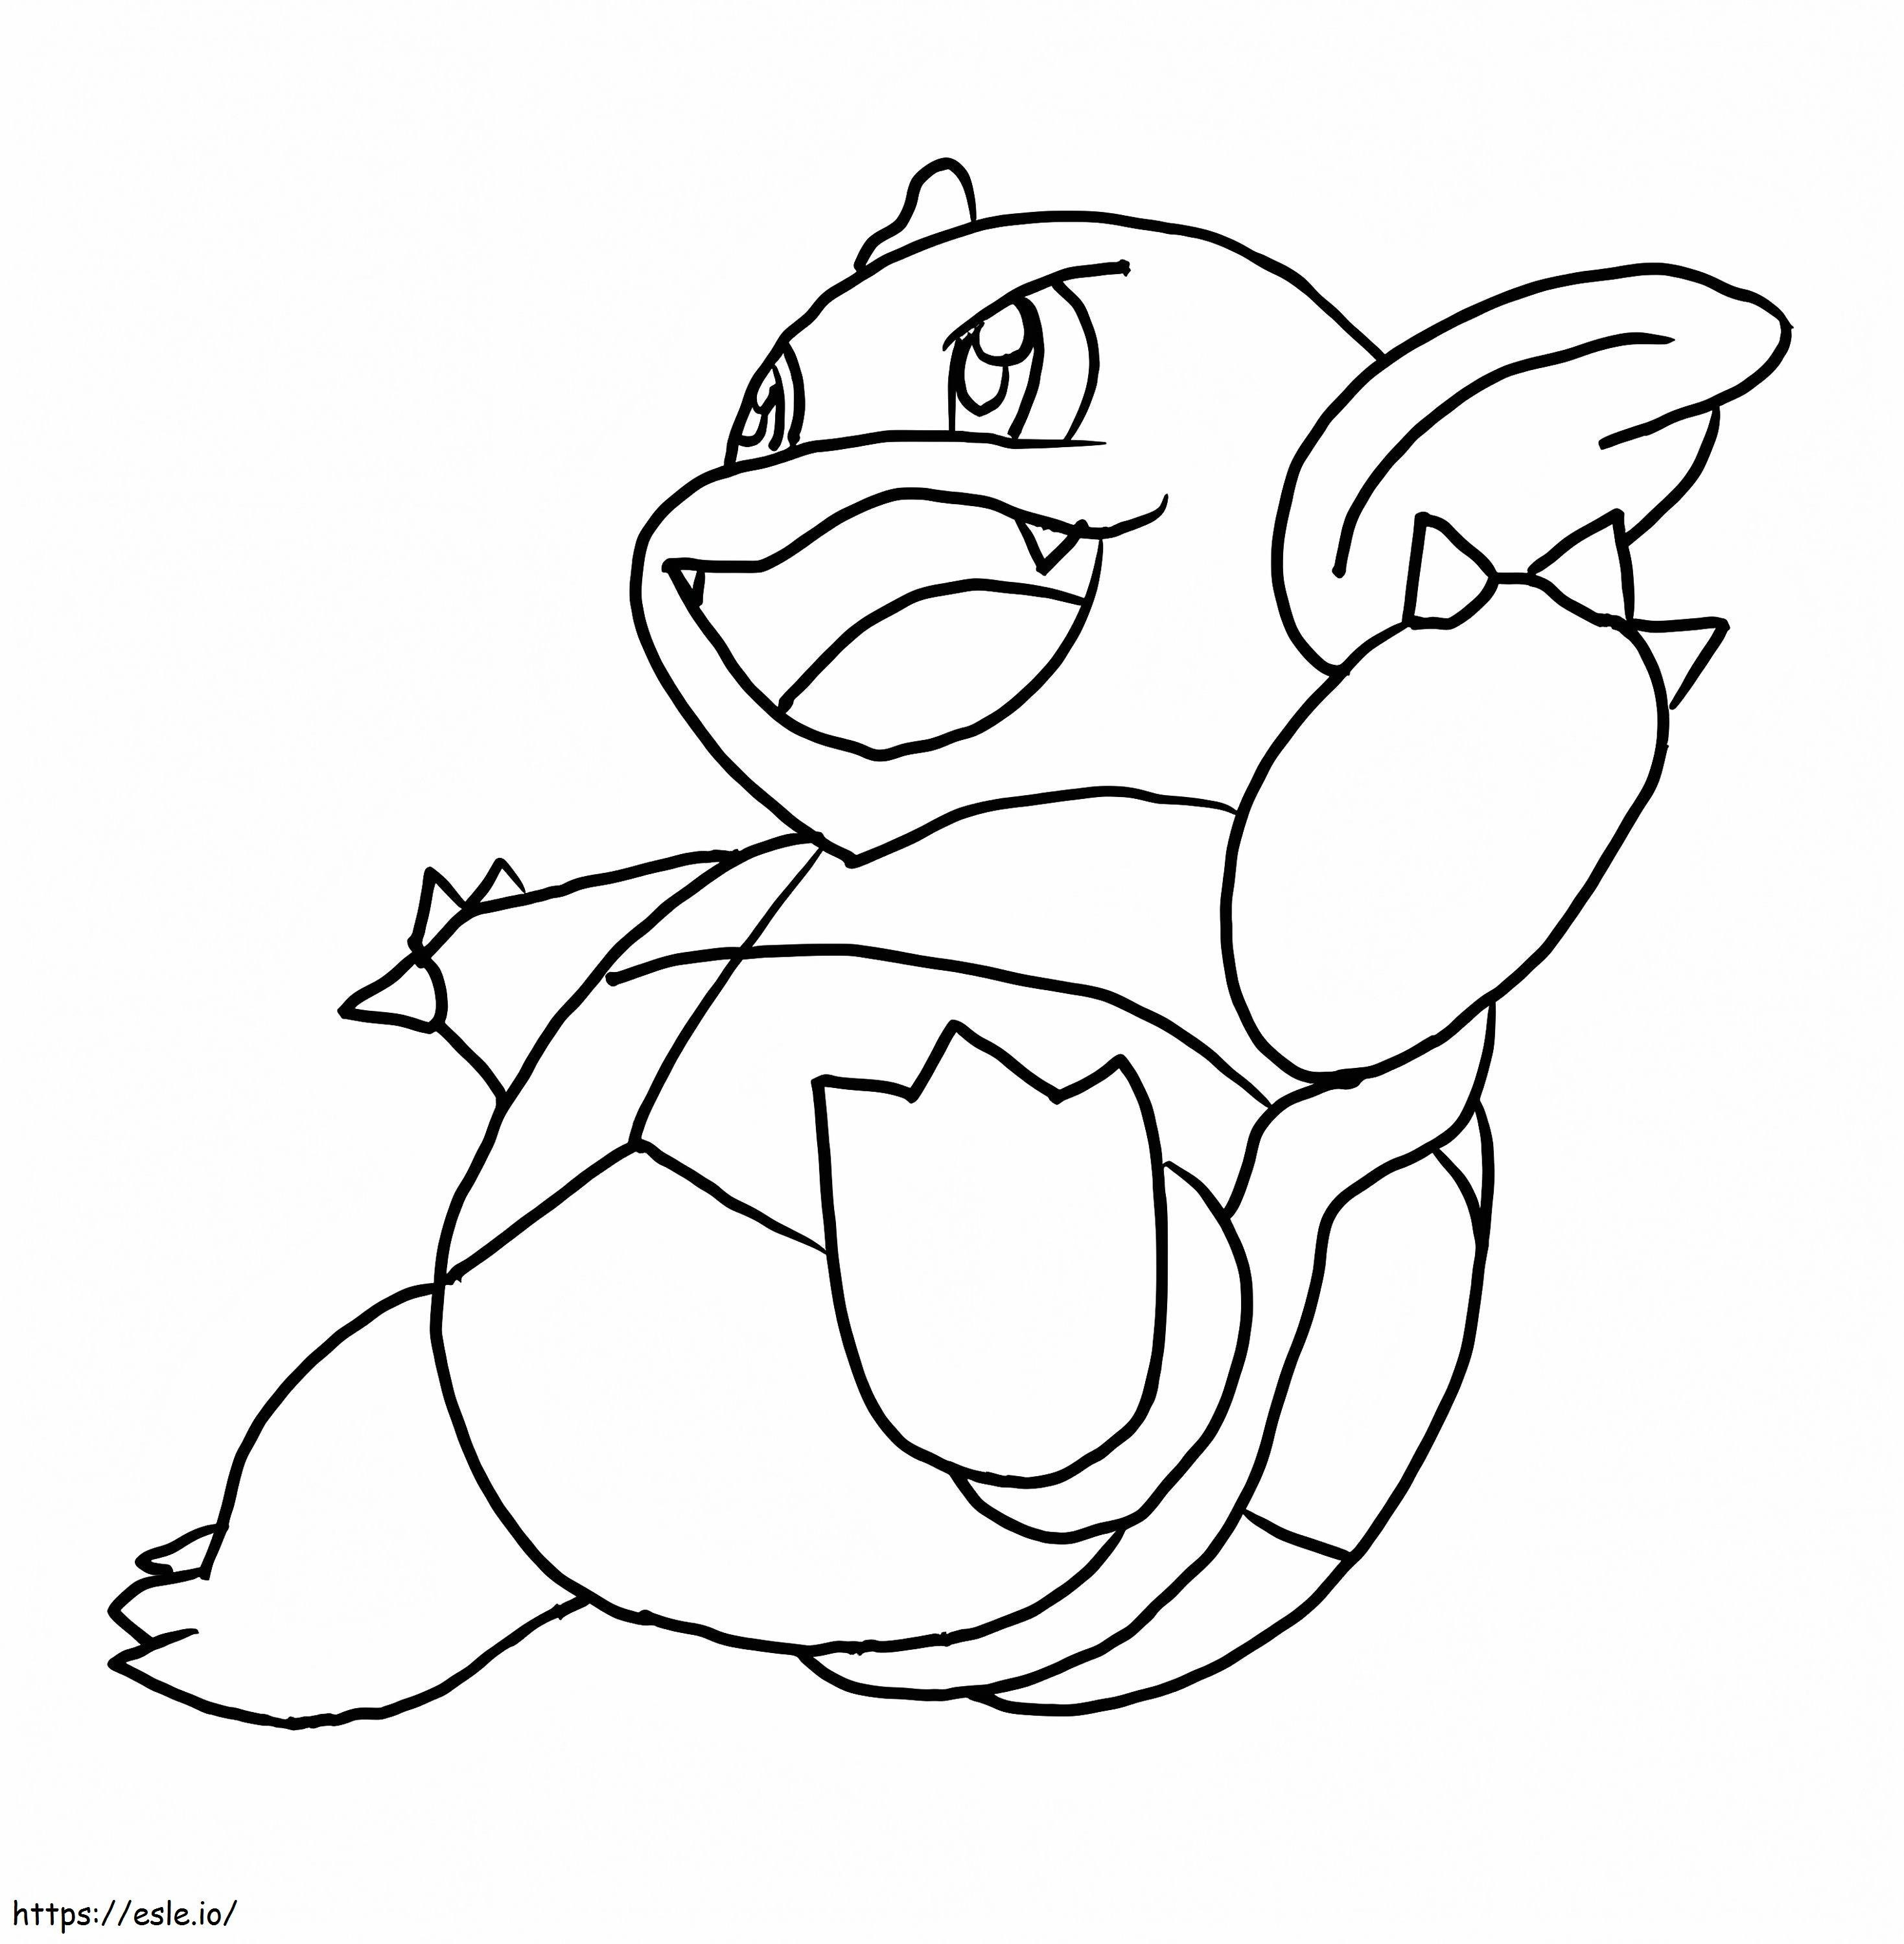 Wartortle coloring page